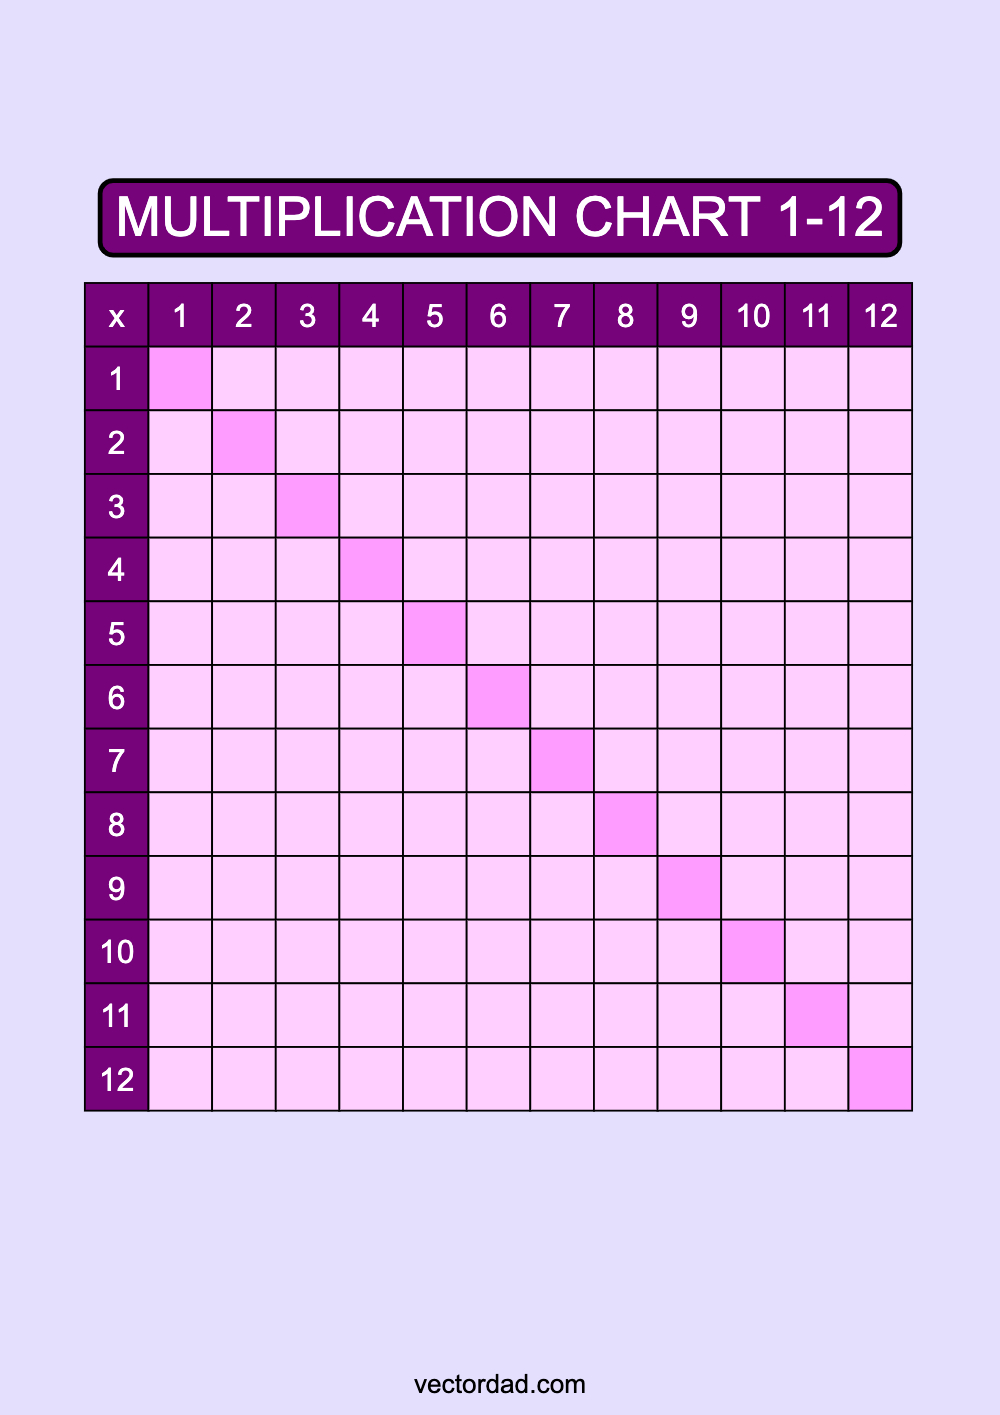 Blank Purple Multiplication Chart Printable 1 to 12 portrait Free,multiplication chart 1-12, multiplication table pdf, multiplication chart printable, 12x12 multiplication chart, high quality, times table, sheet, pdf, blank, empty, 3rd grade, 4th grade, 5th grade, template, print, download, online